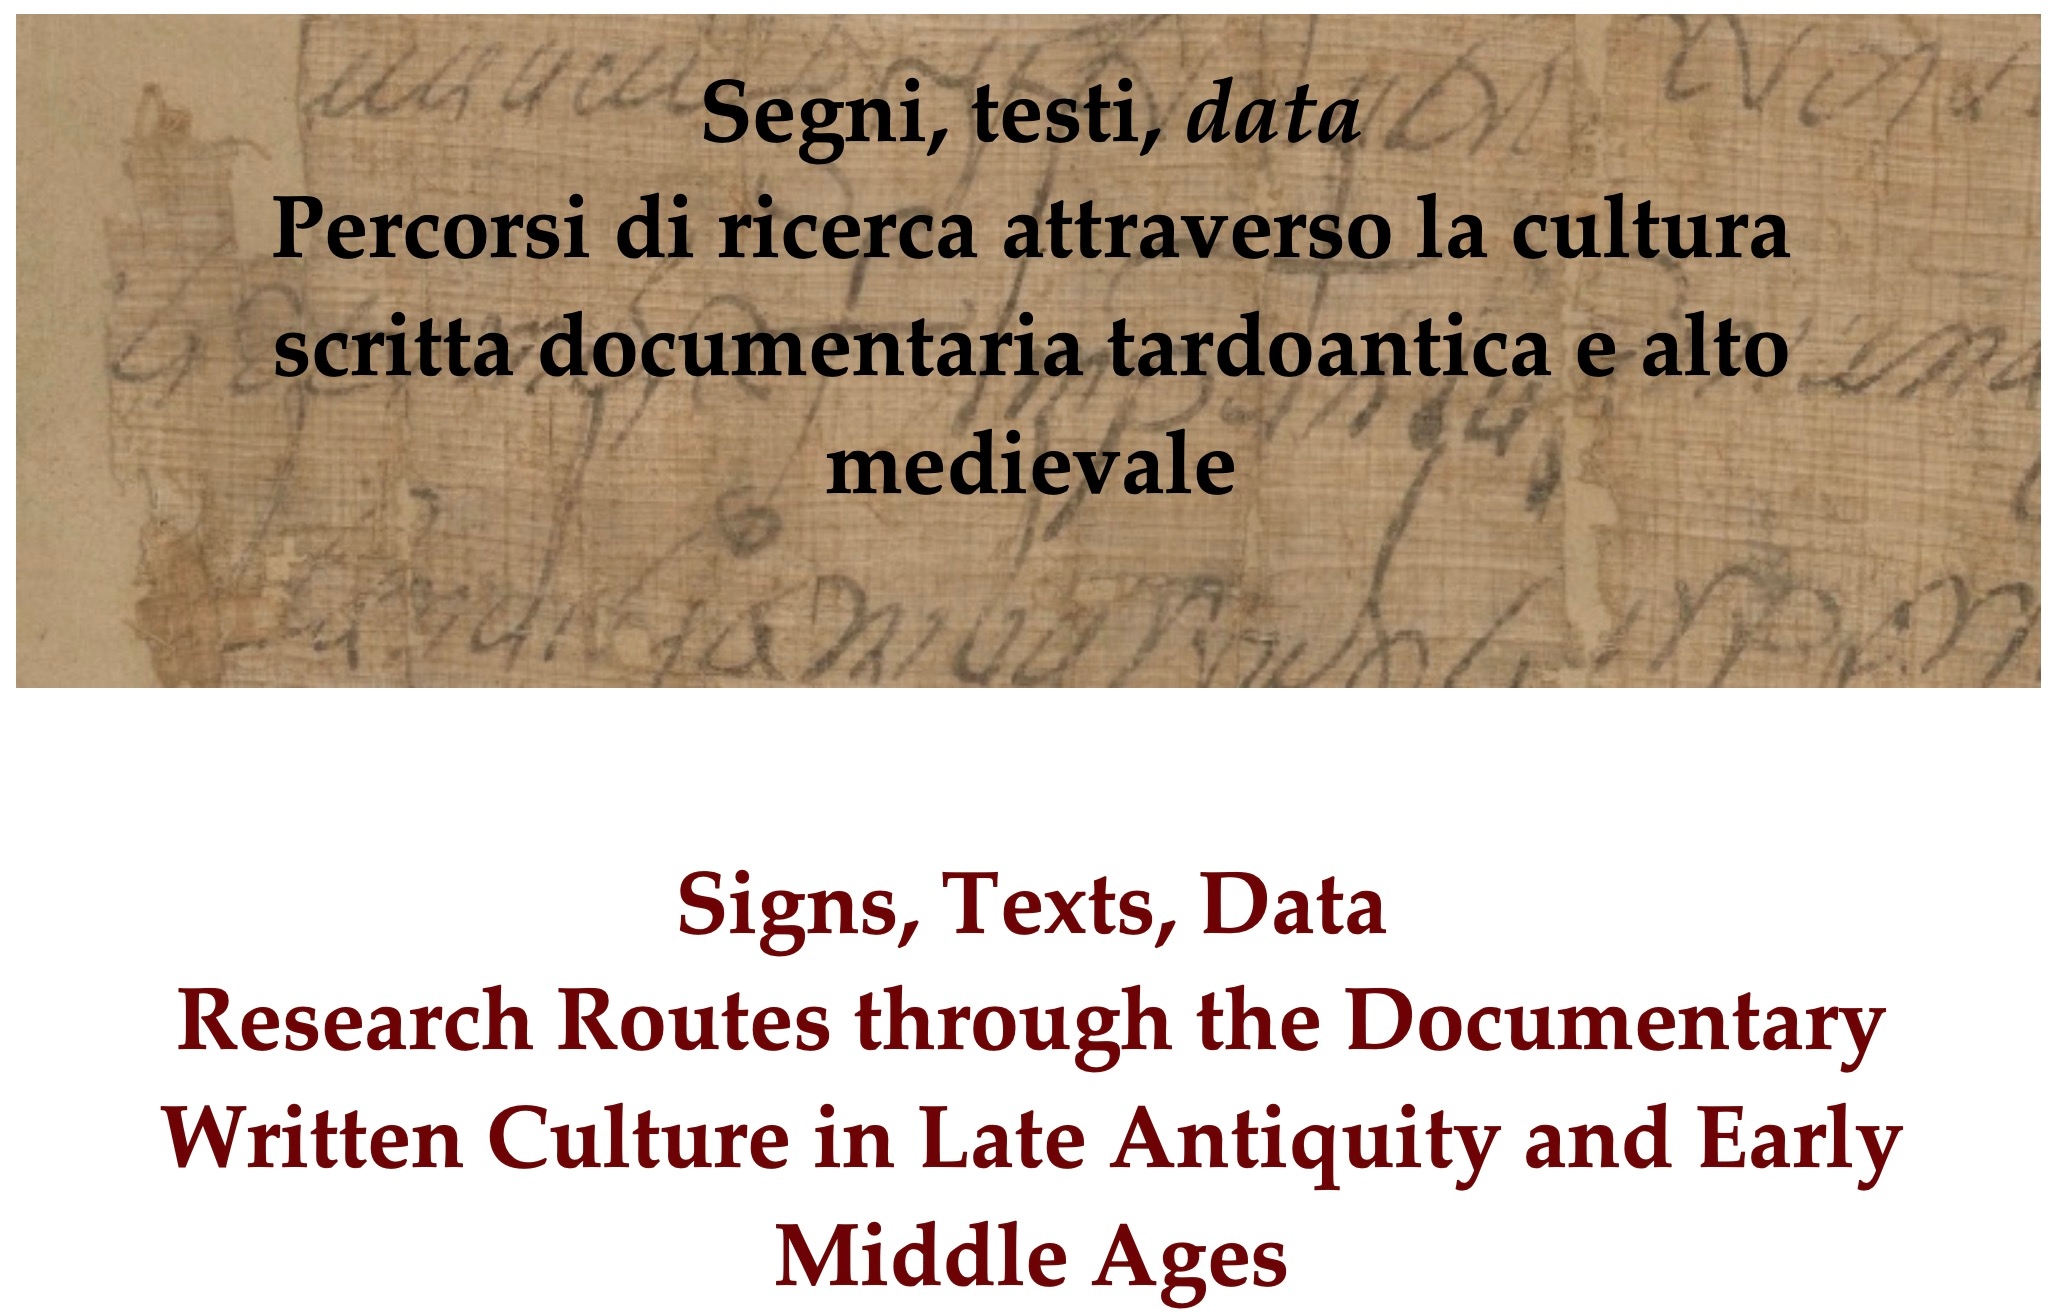 Partecipazione alla conferenza “Signs, Texts, Data Research Routes through the Documentary Written Culture in Late Antiquity and Early Middle Ages” di null